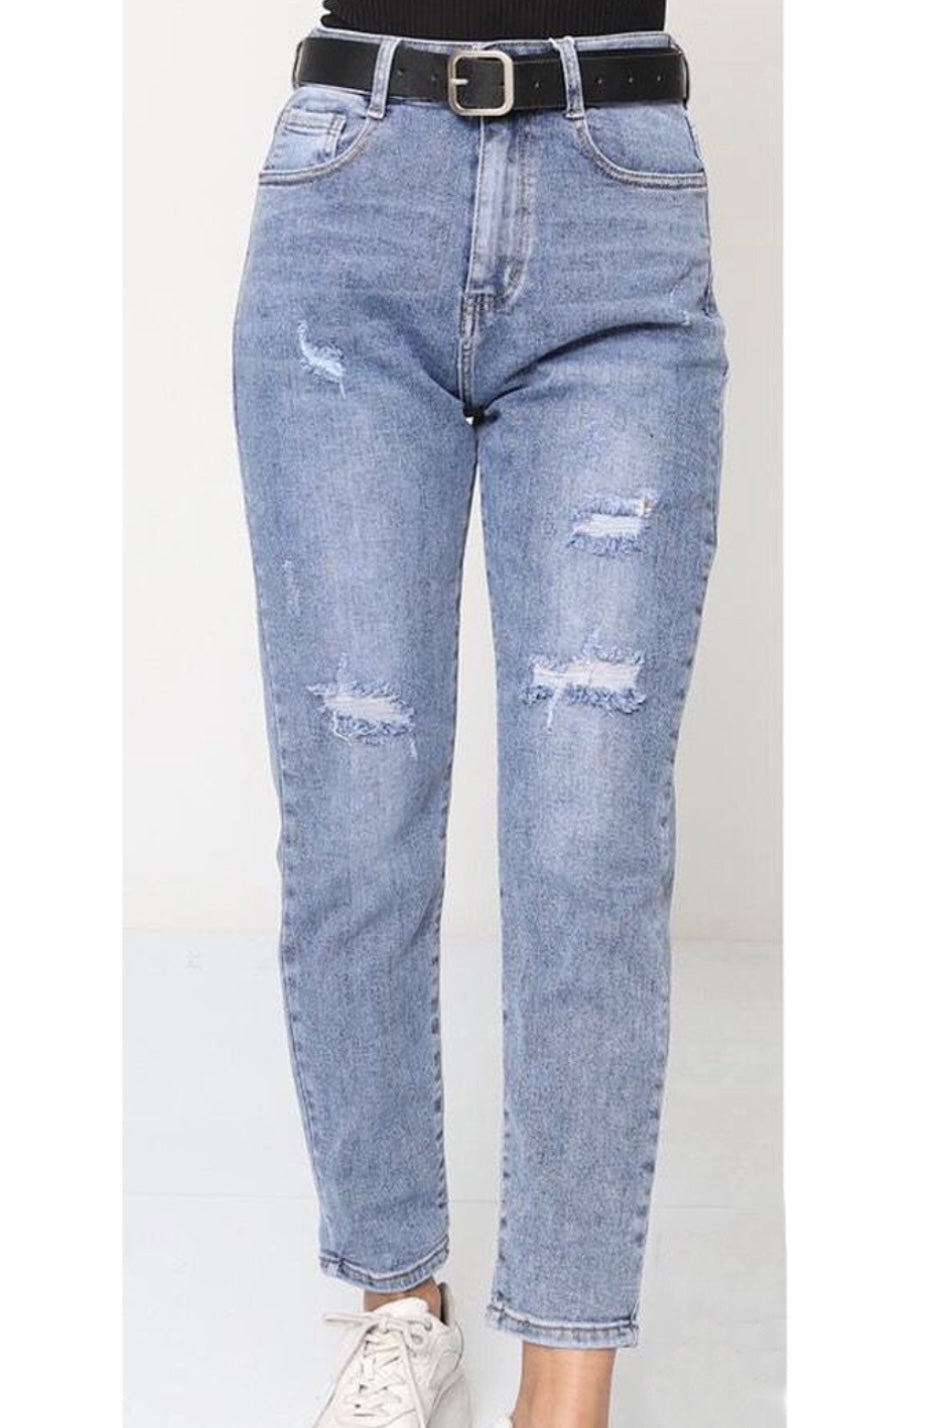 Lightwash Belted Ripped Mom Jean